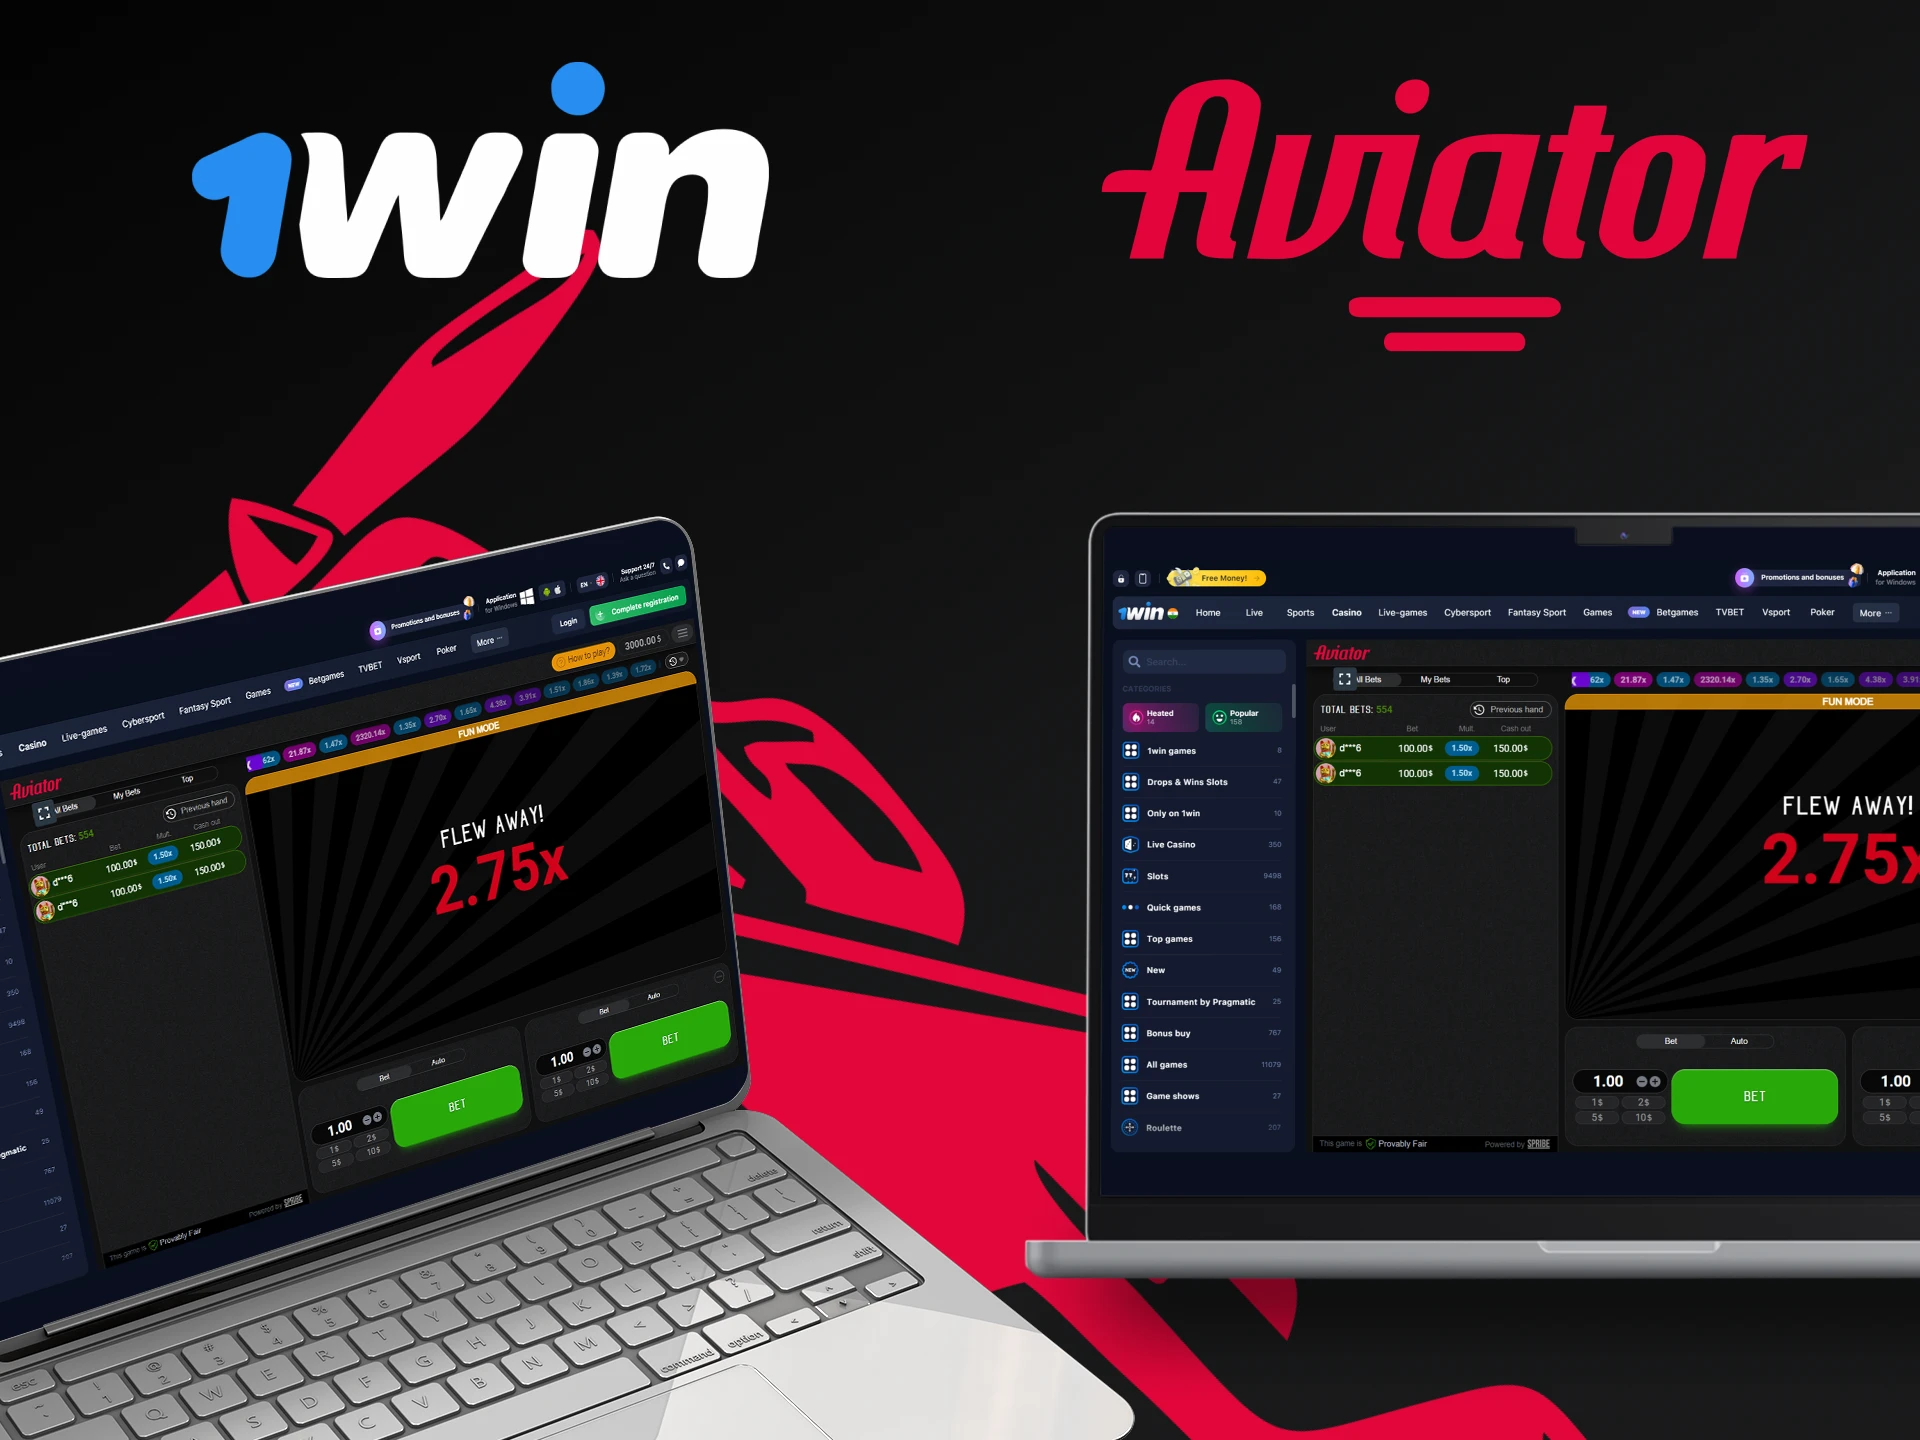 Play Aviator by 1win on any device.